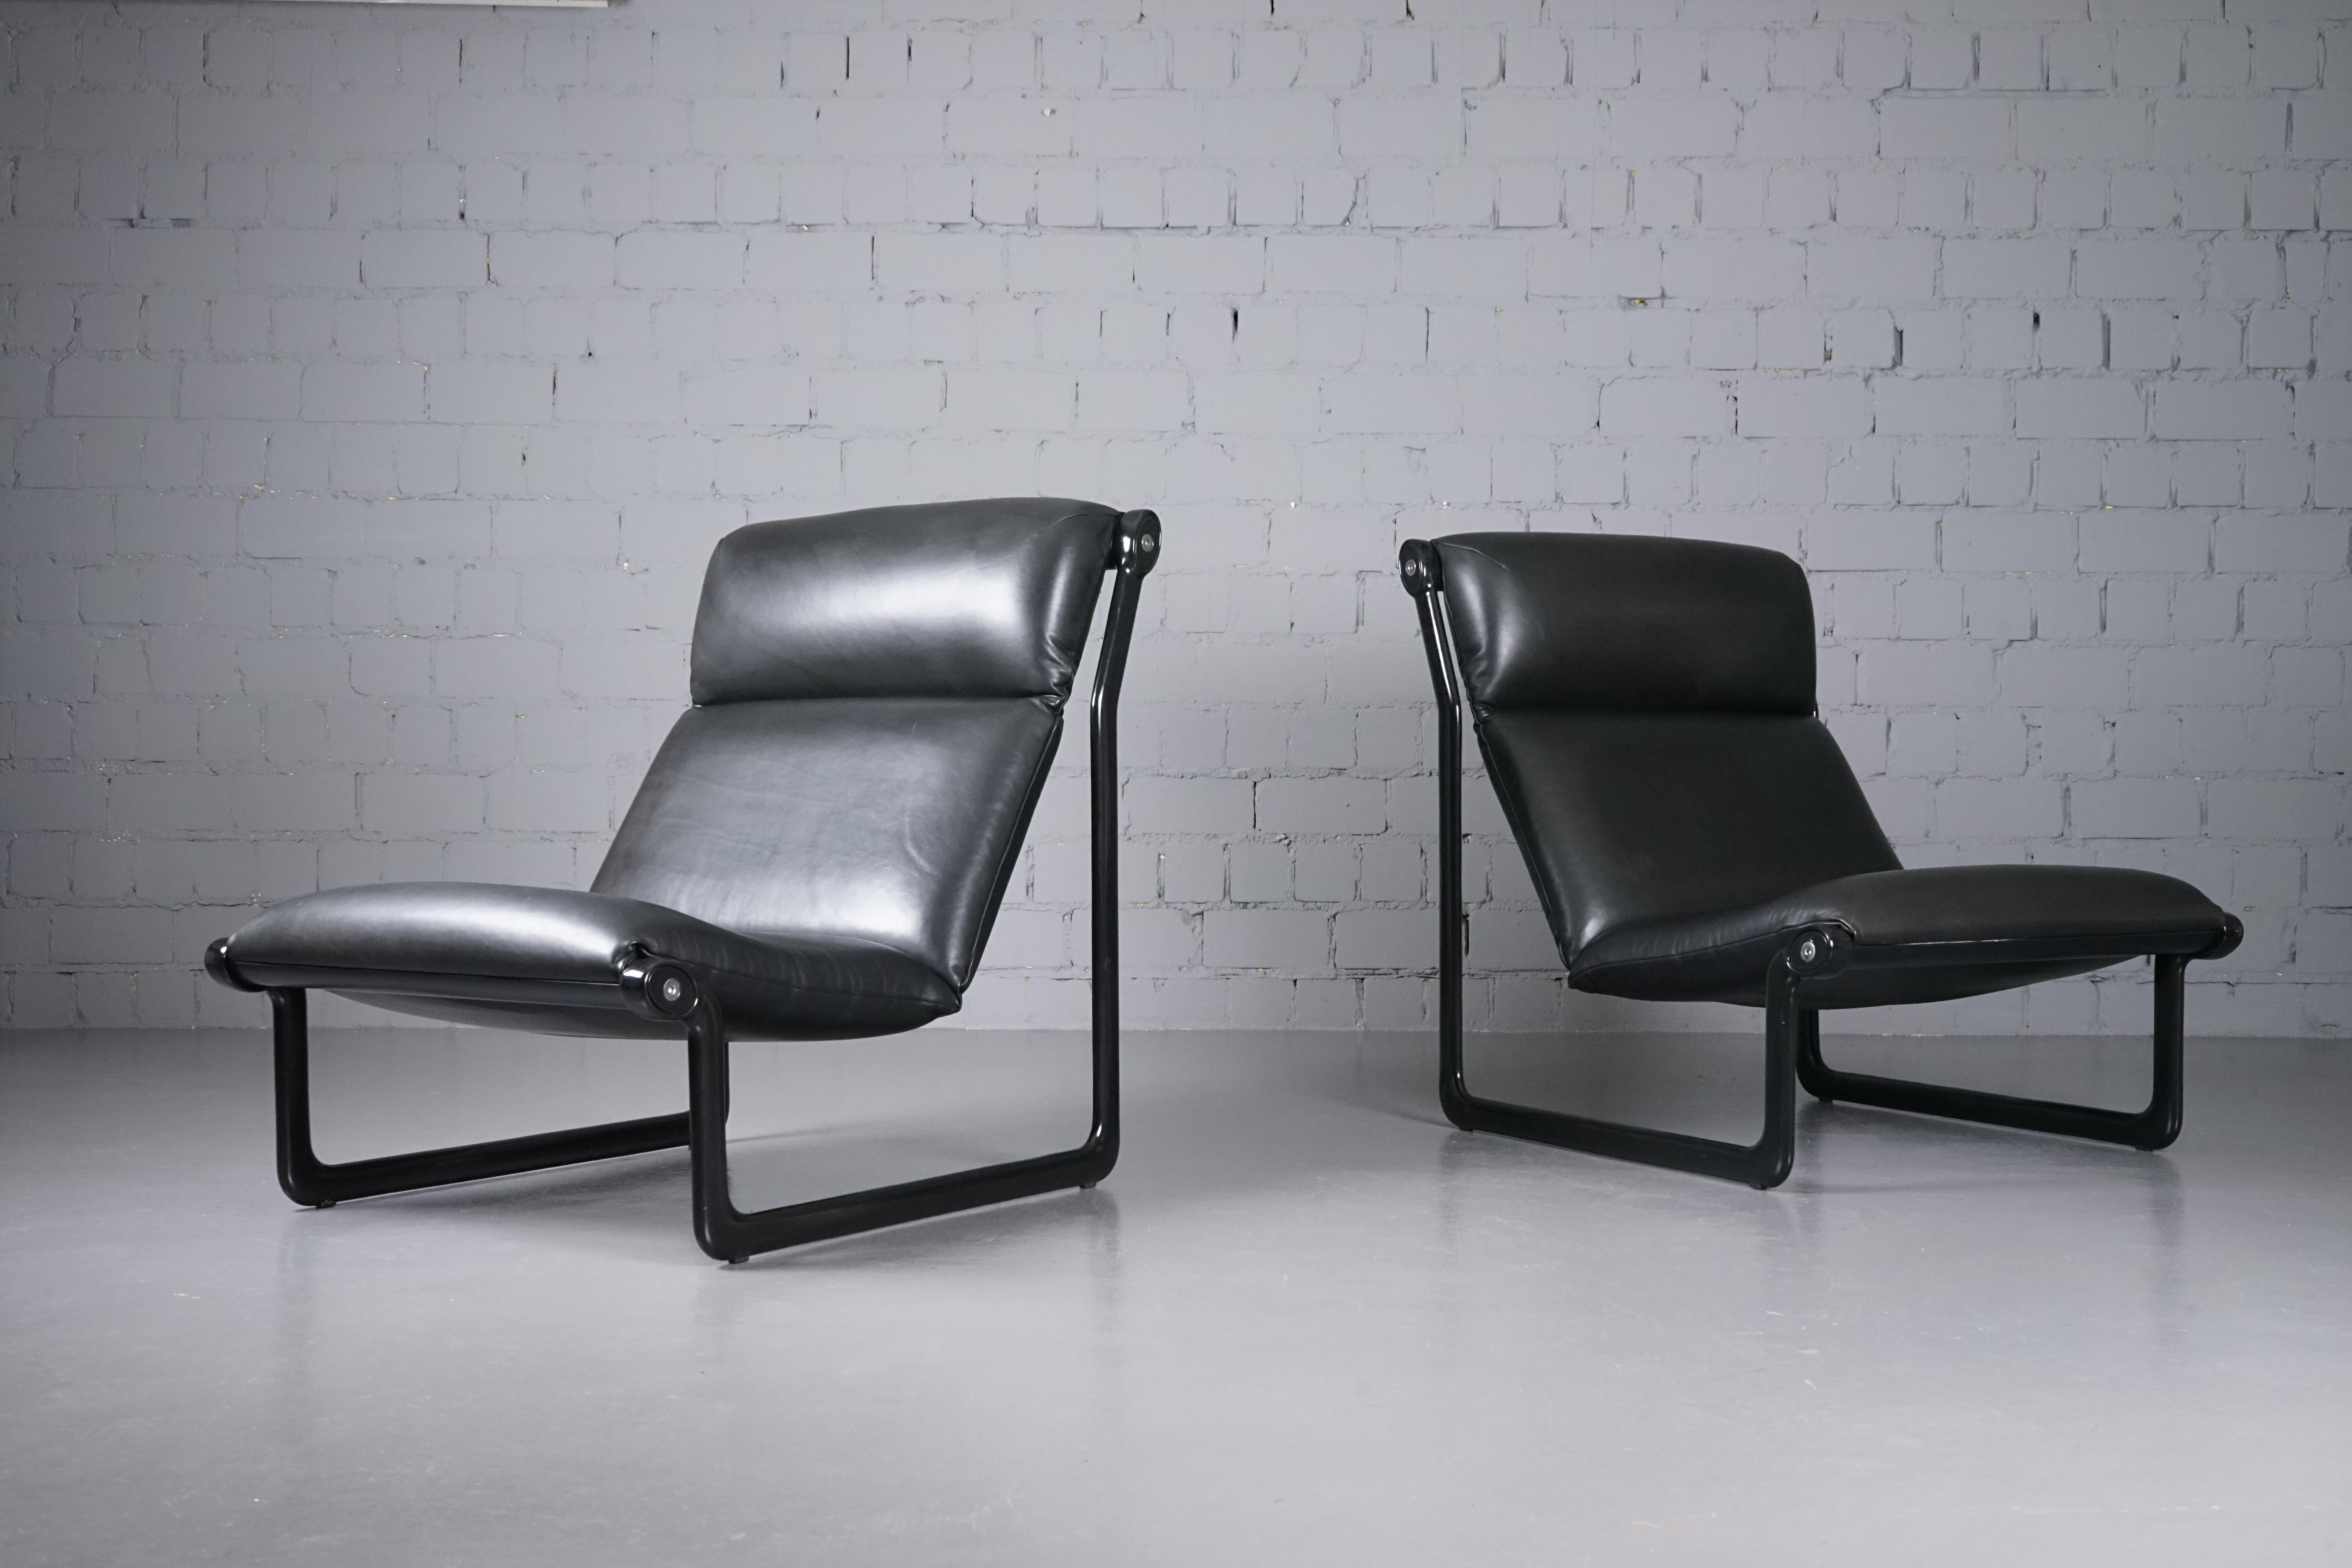 Arm Chair Modell 2001 by Bruce Hannah & Andrew I. Morrison for Knoll Set of 2 In Good Condition For Sale In Kelkheim (Taunus), HE